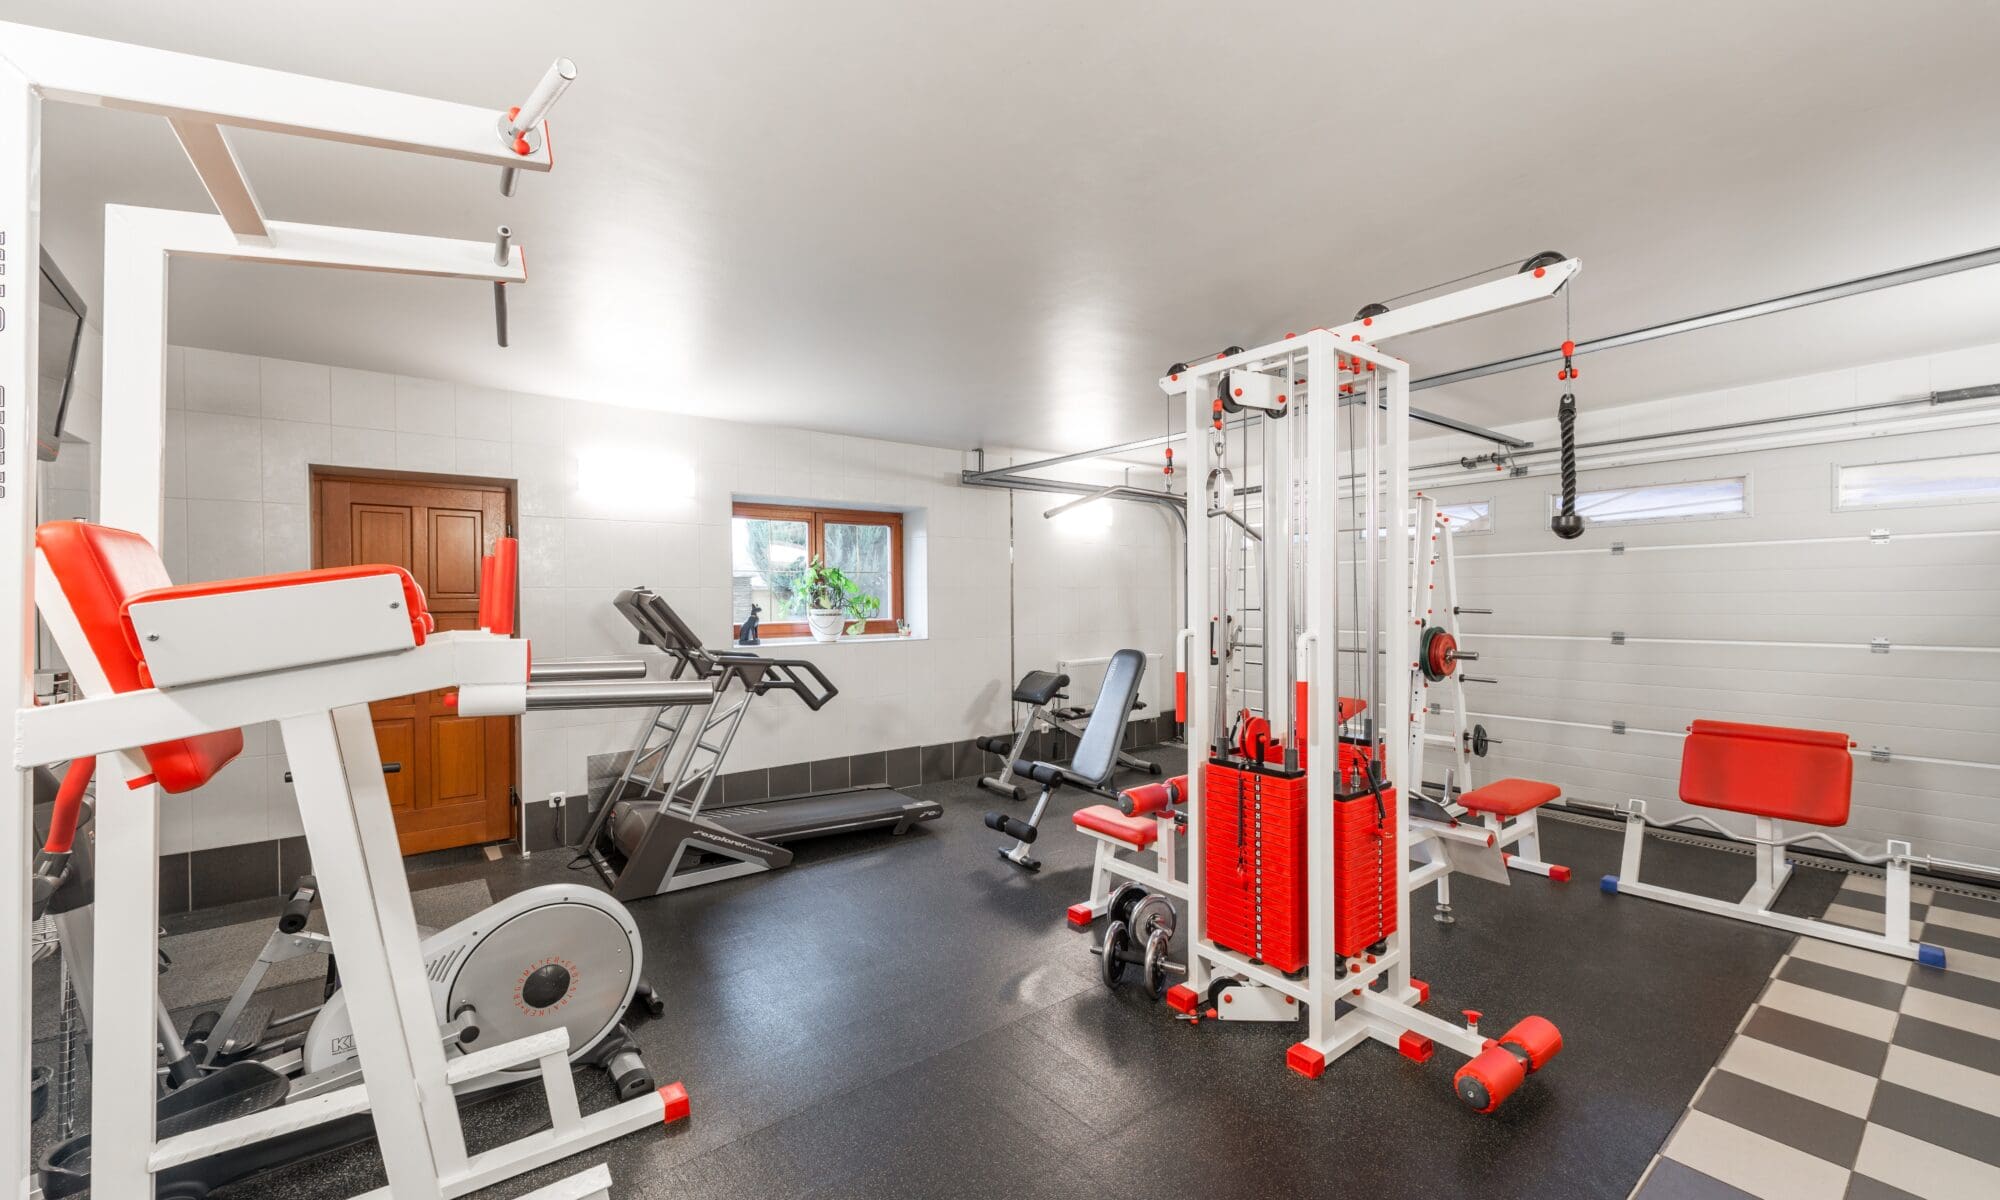 A Guide to Purchasing Home Fitness Equipment